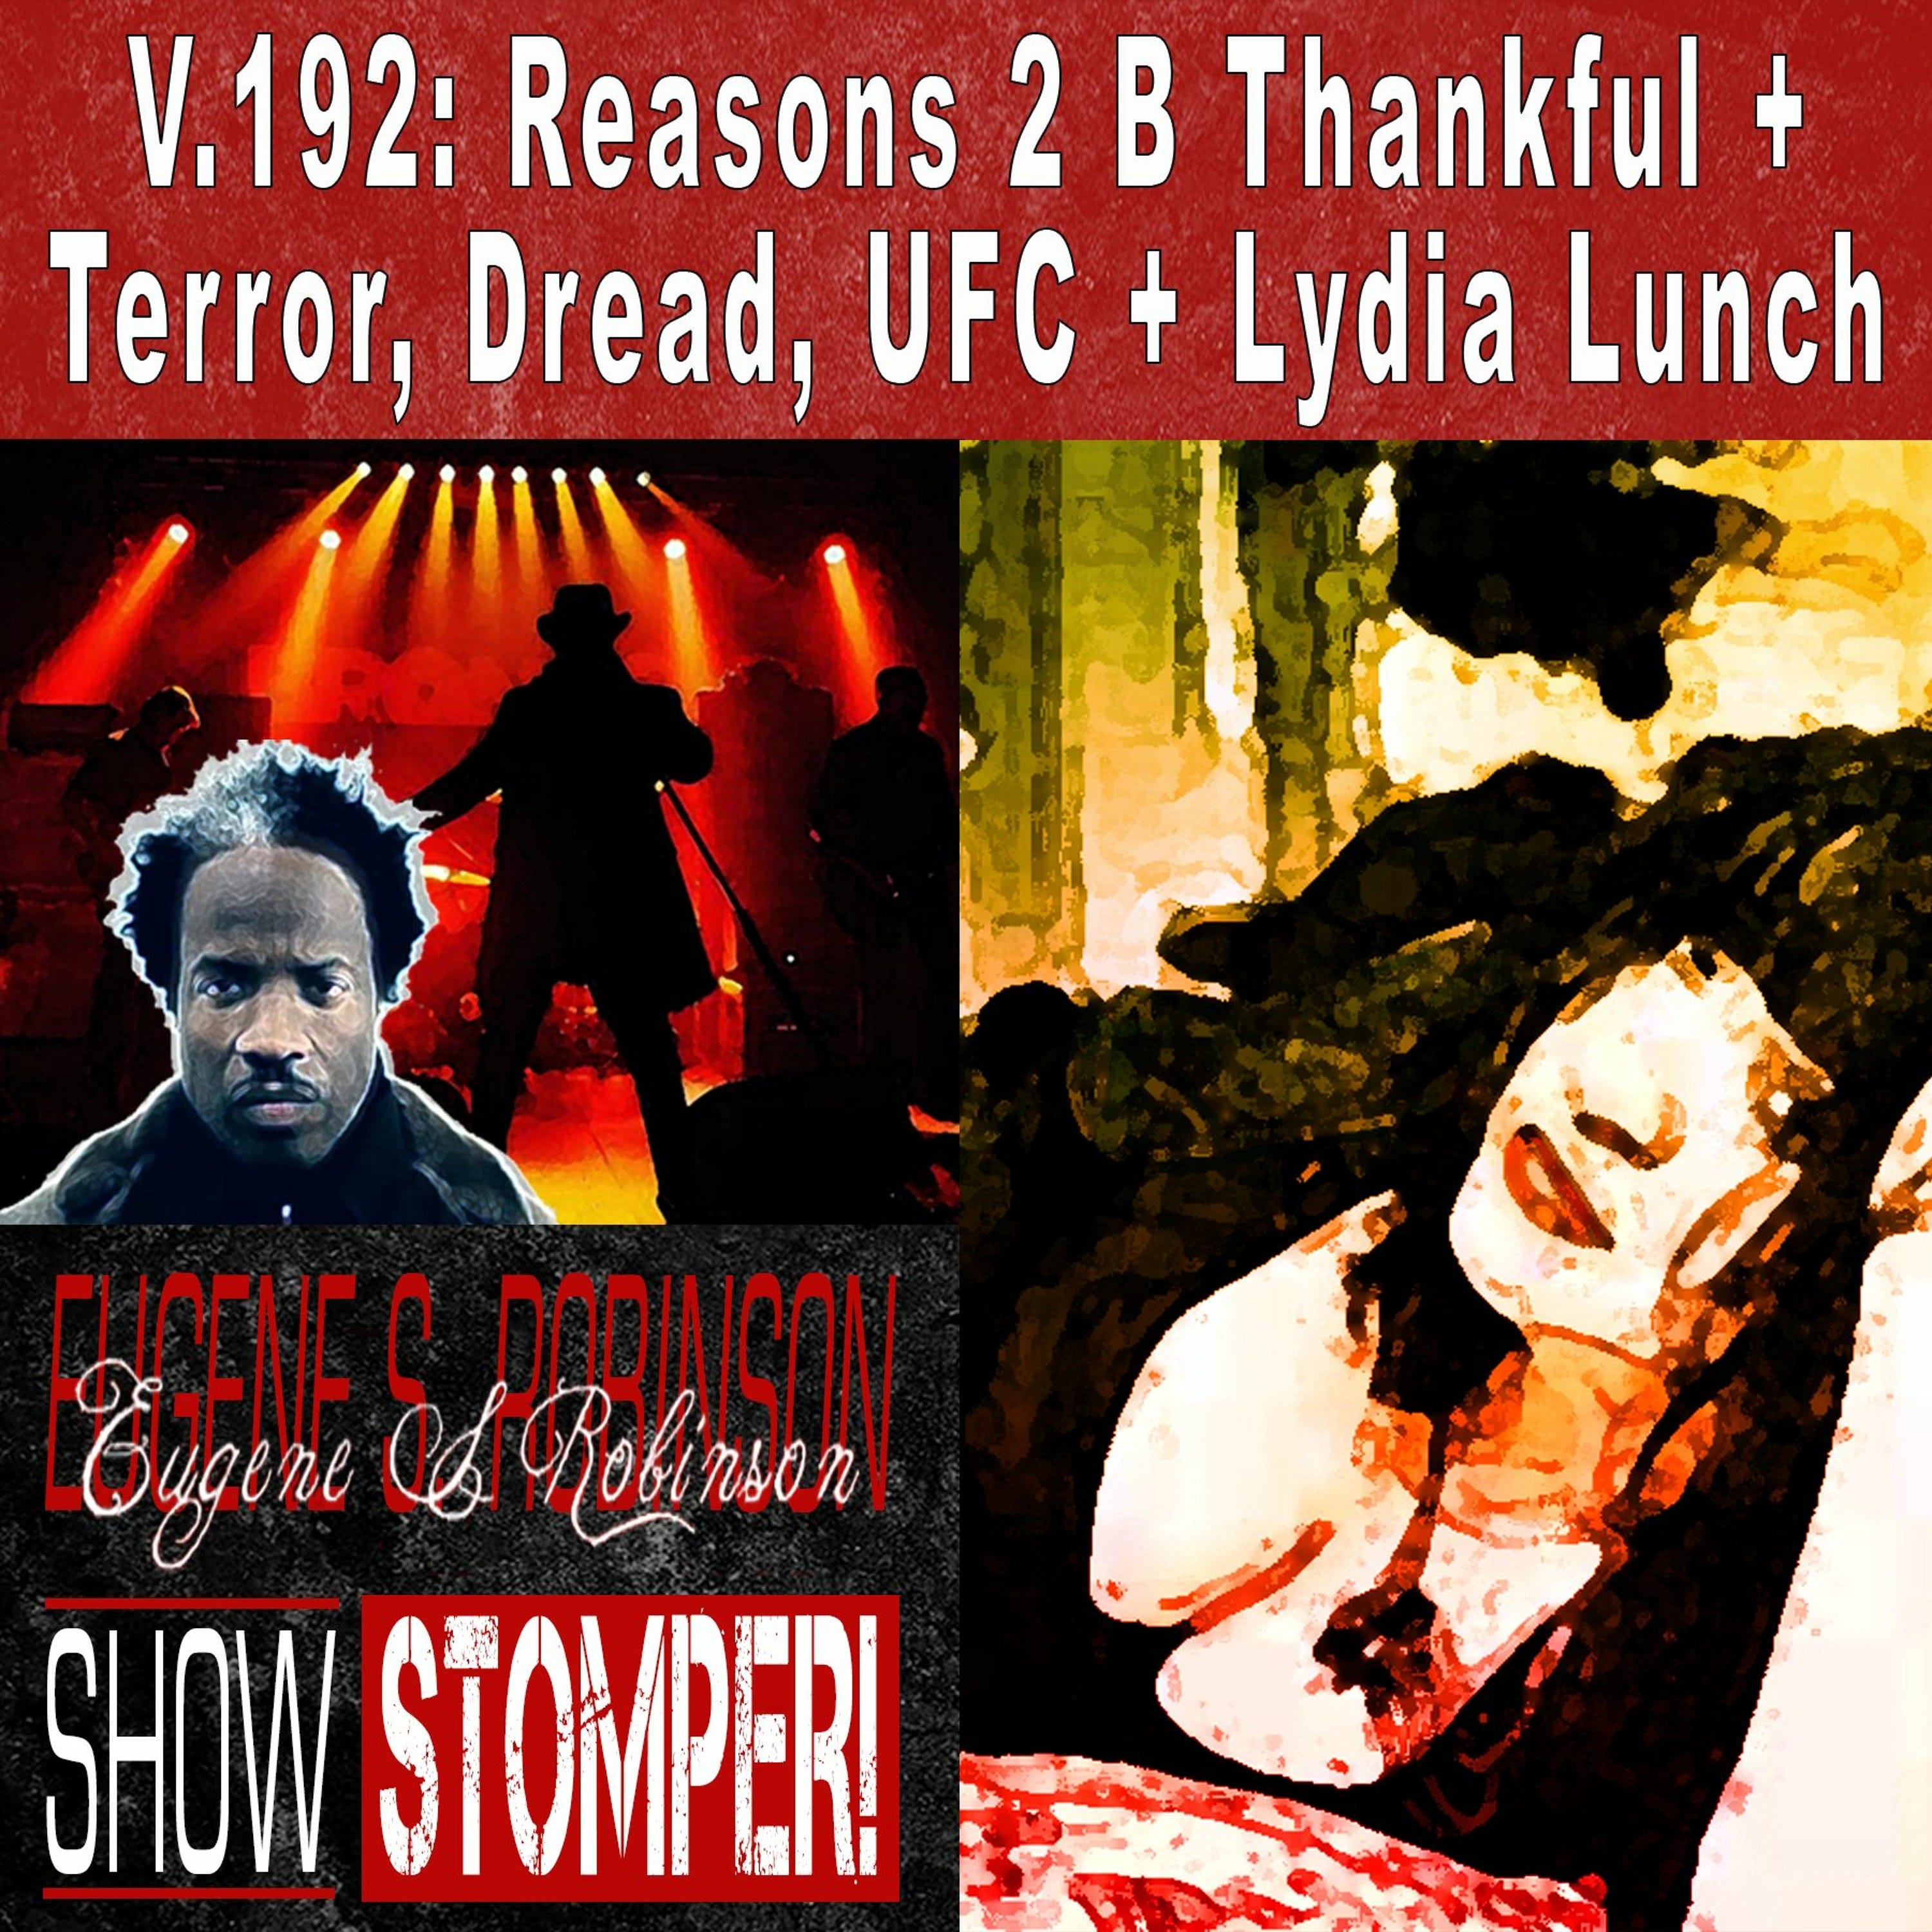 V.192 Reasons 2 B Thankful Terror, Dread, UFC Lydia Lunch On The Eugene S. Robinson Show Stomper!